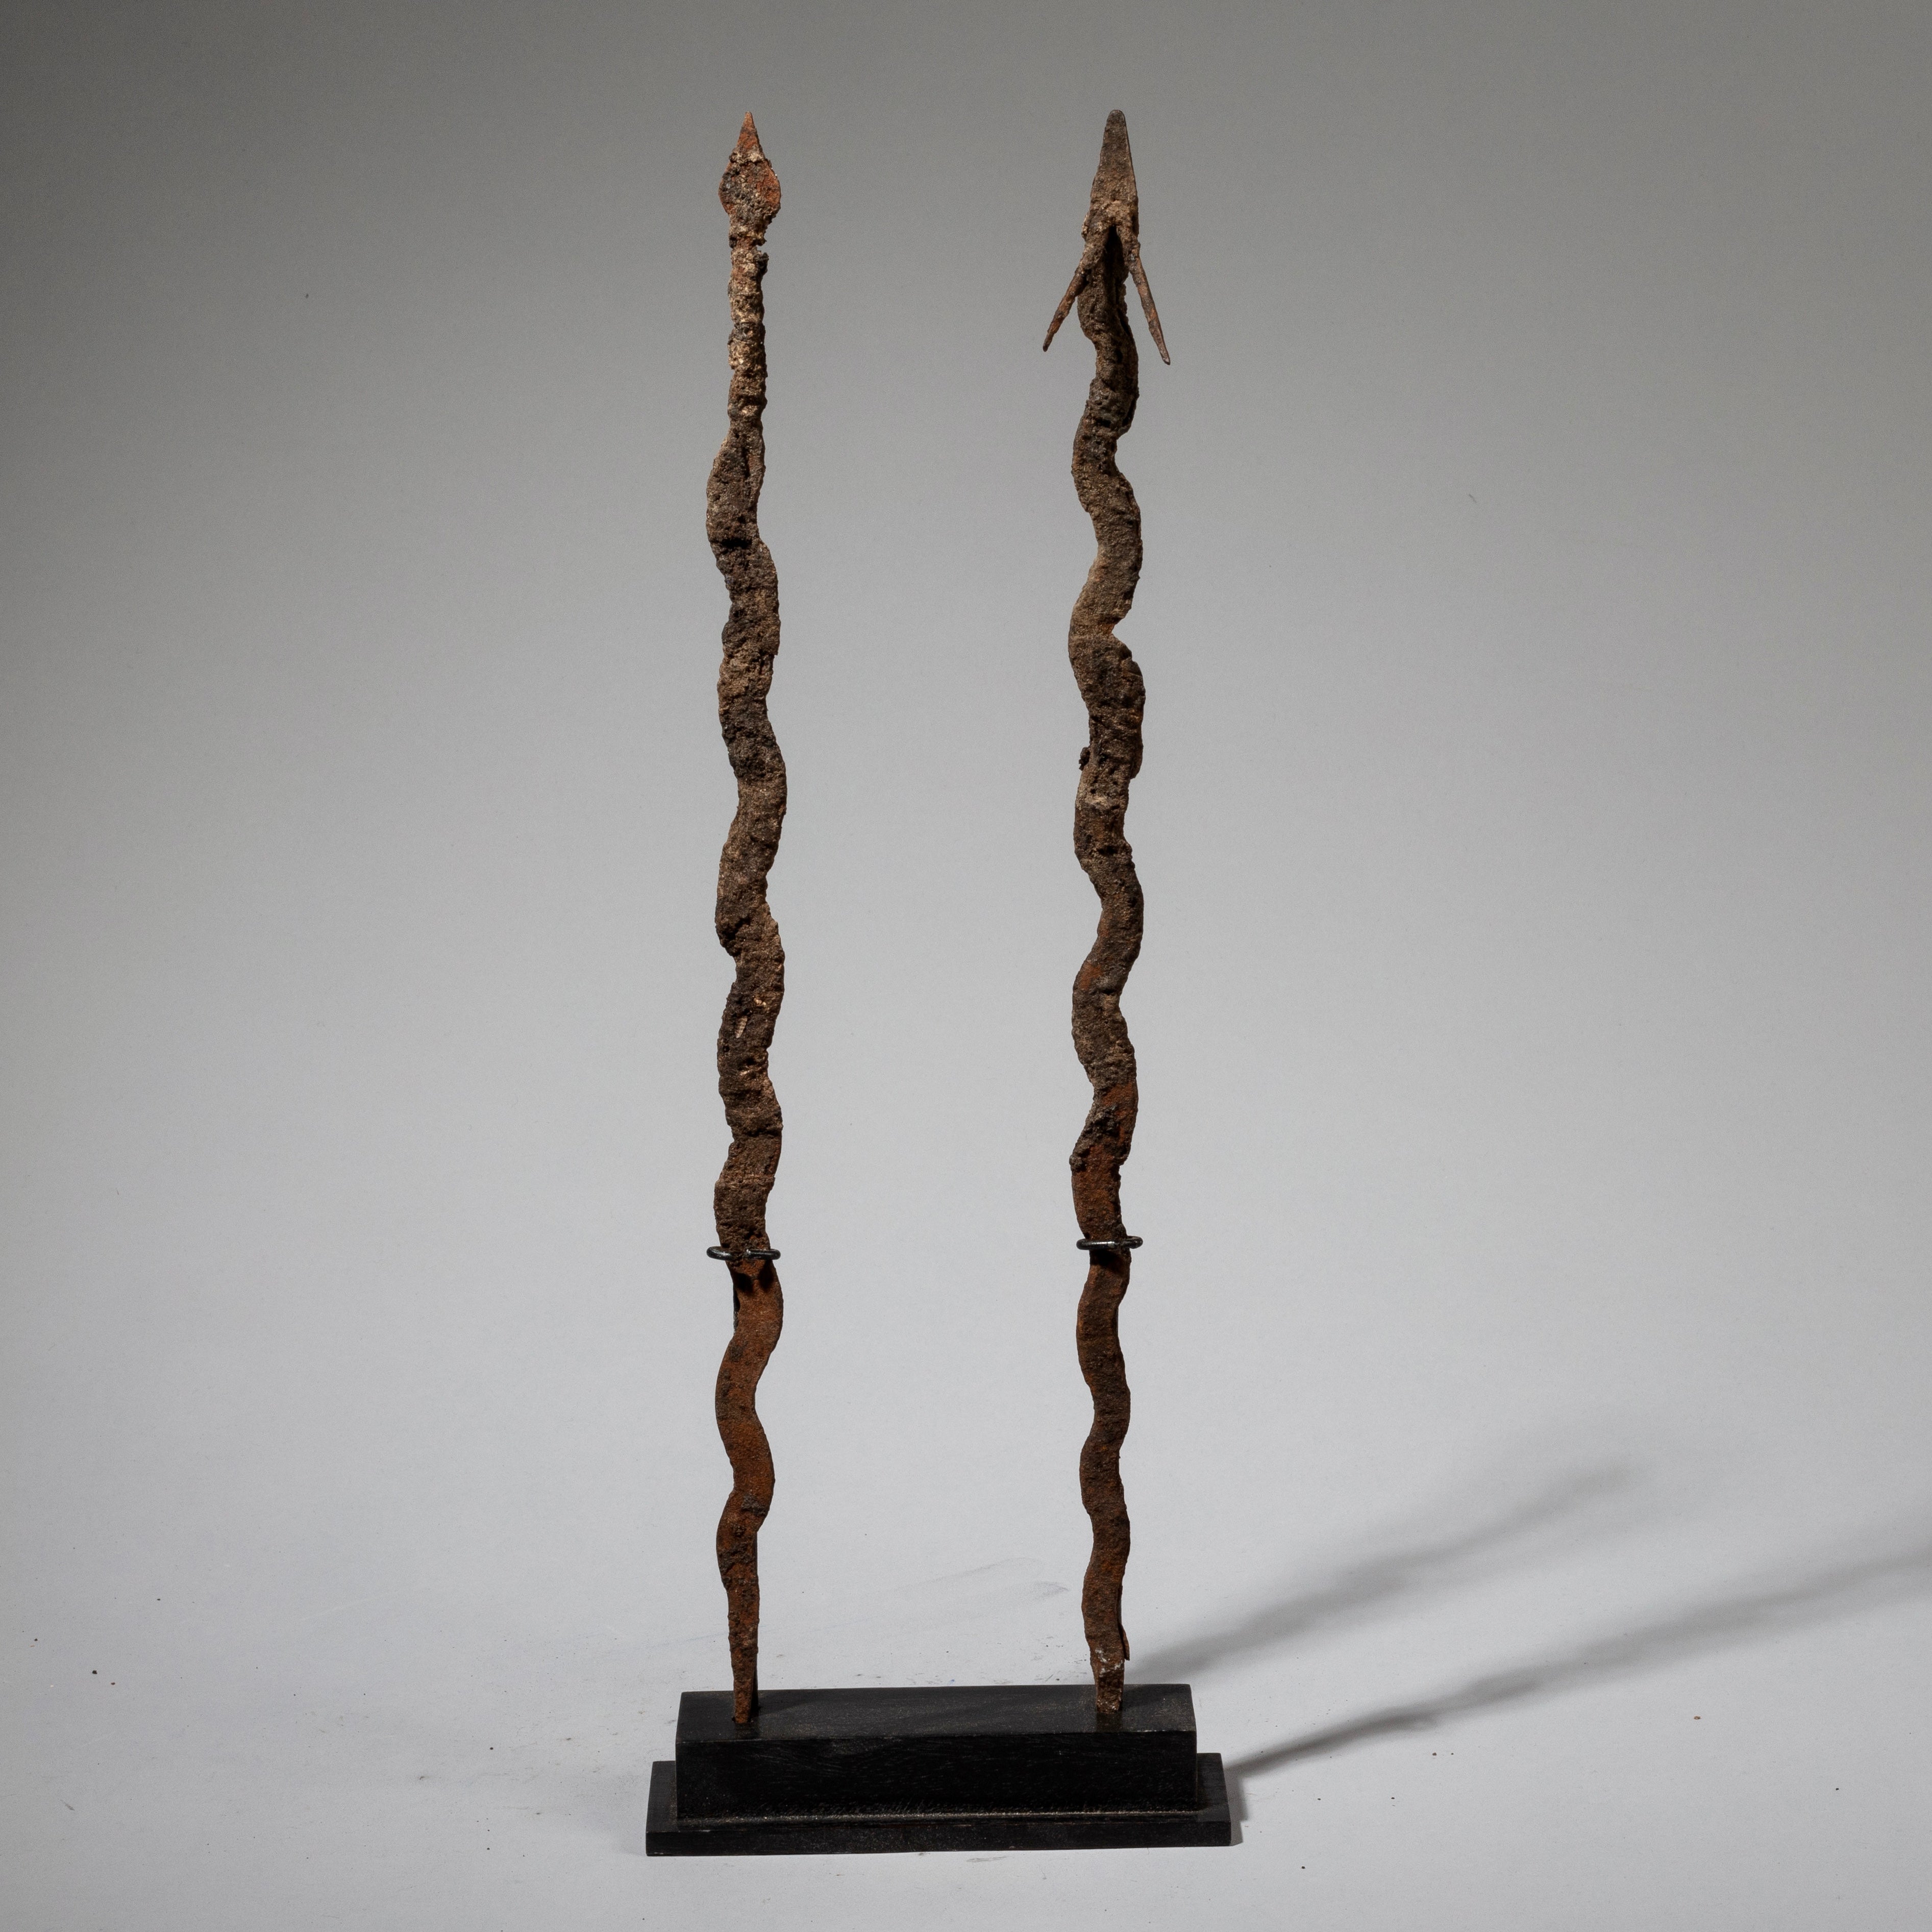 2 IRON SNAKES WITH ENCRUSTED PATINAS FROM THE LOBI TRIBE OF BURKINA FASO W AFRICA ( No 1771)